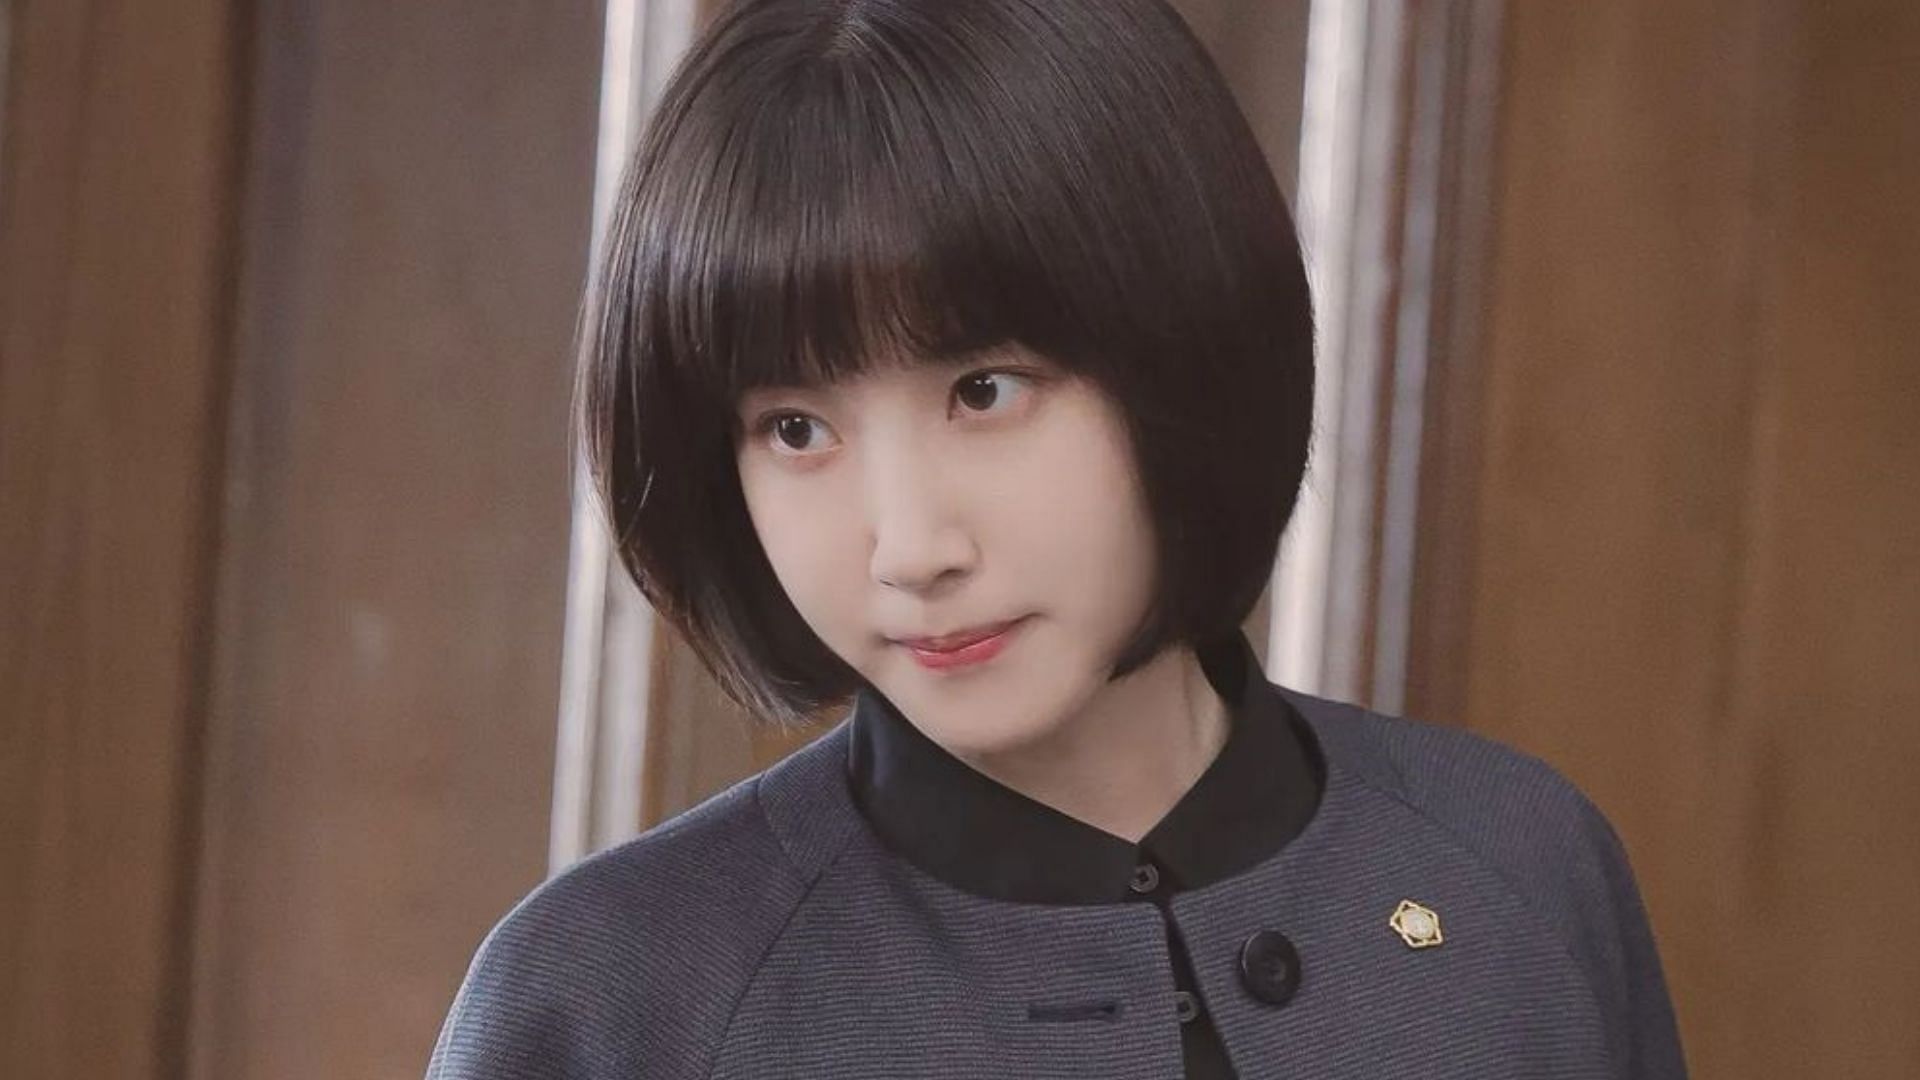 Park Eun-bin opens up about the pressures for reprising her role in Extraordinary Attorney Woo season 2 (Image via Instagram/eunbining0904)